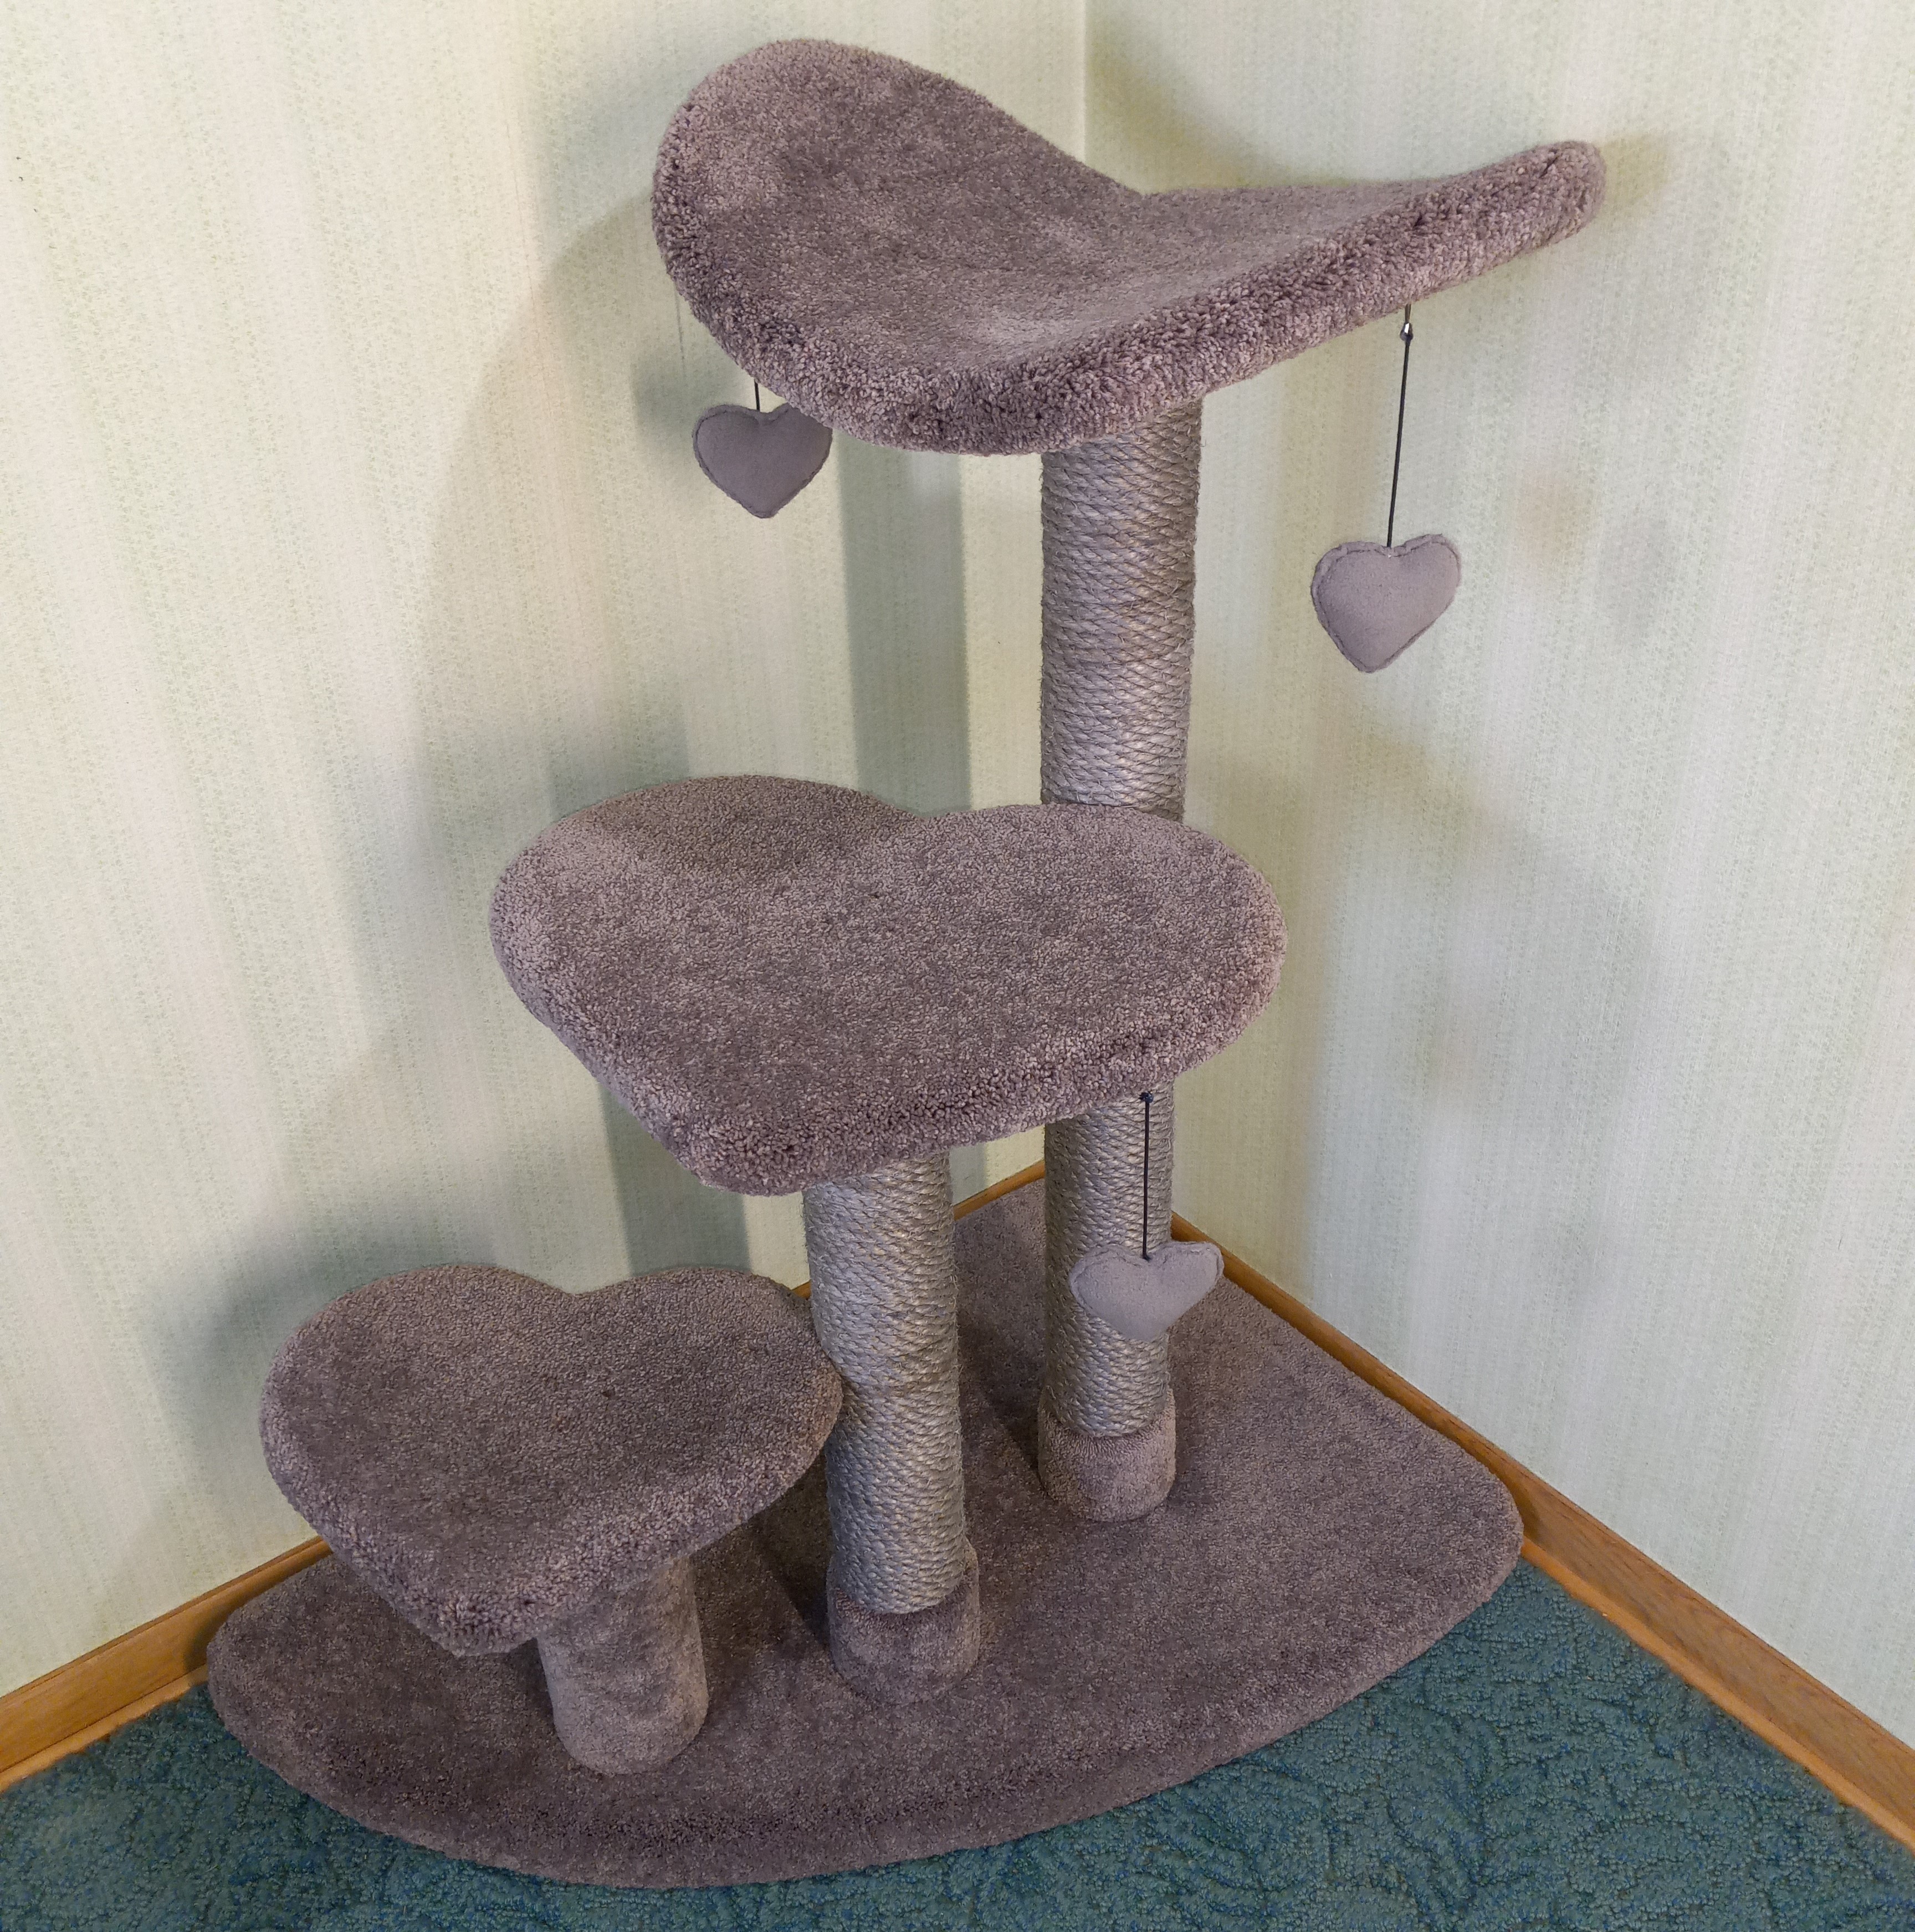 This unique variation of the Sweetheart Perch fits neatly into a room corner.  Includes gray dyed sisal for scratching & 3 matching hand-made fleece heart toys 